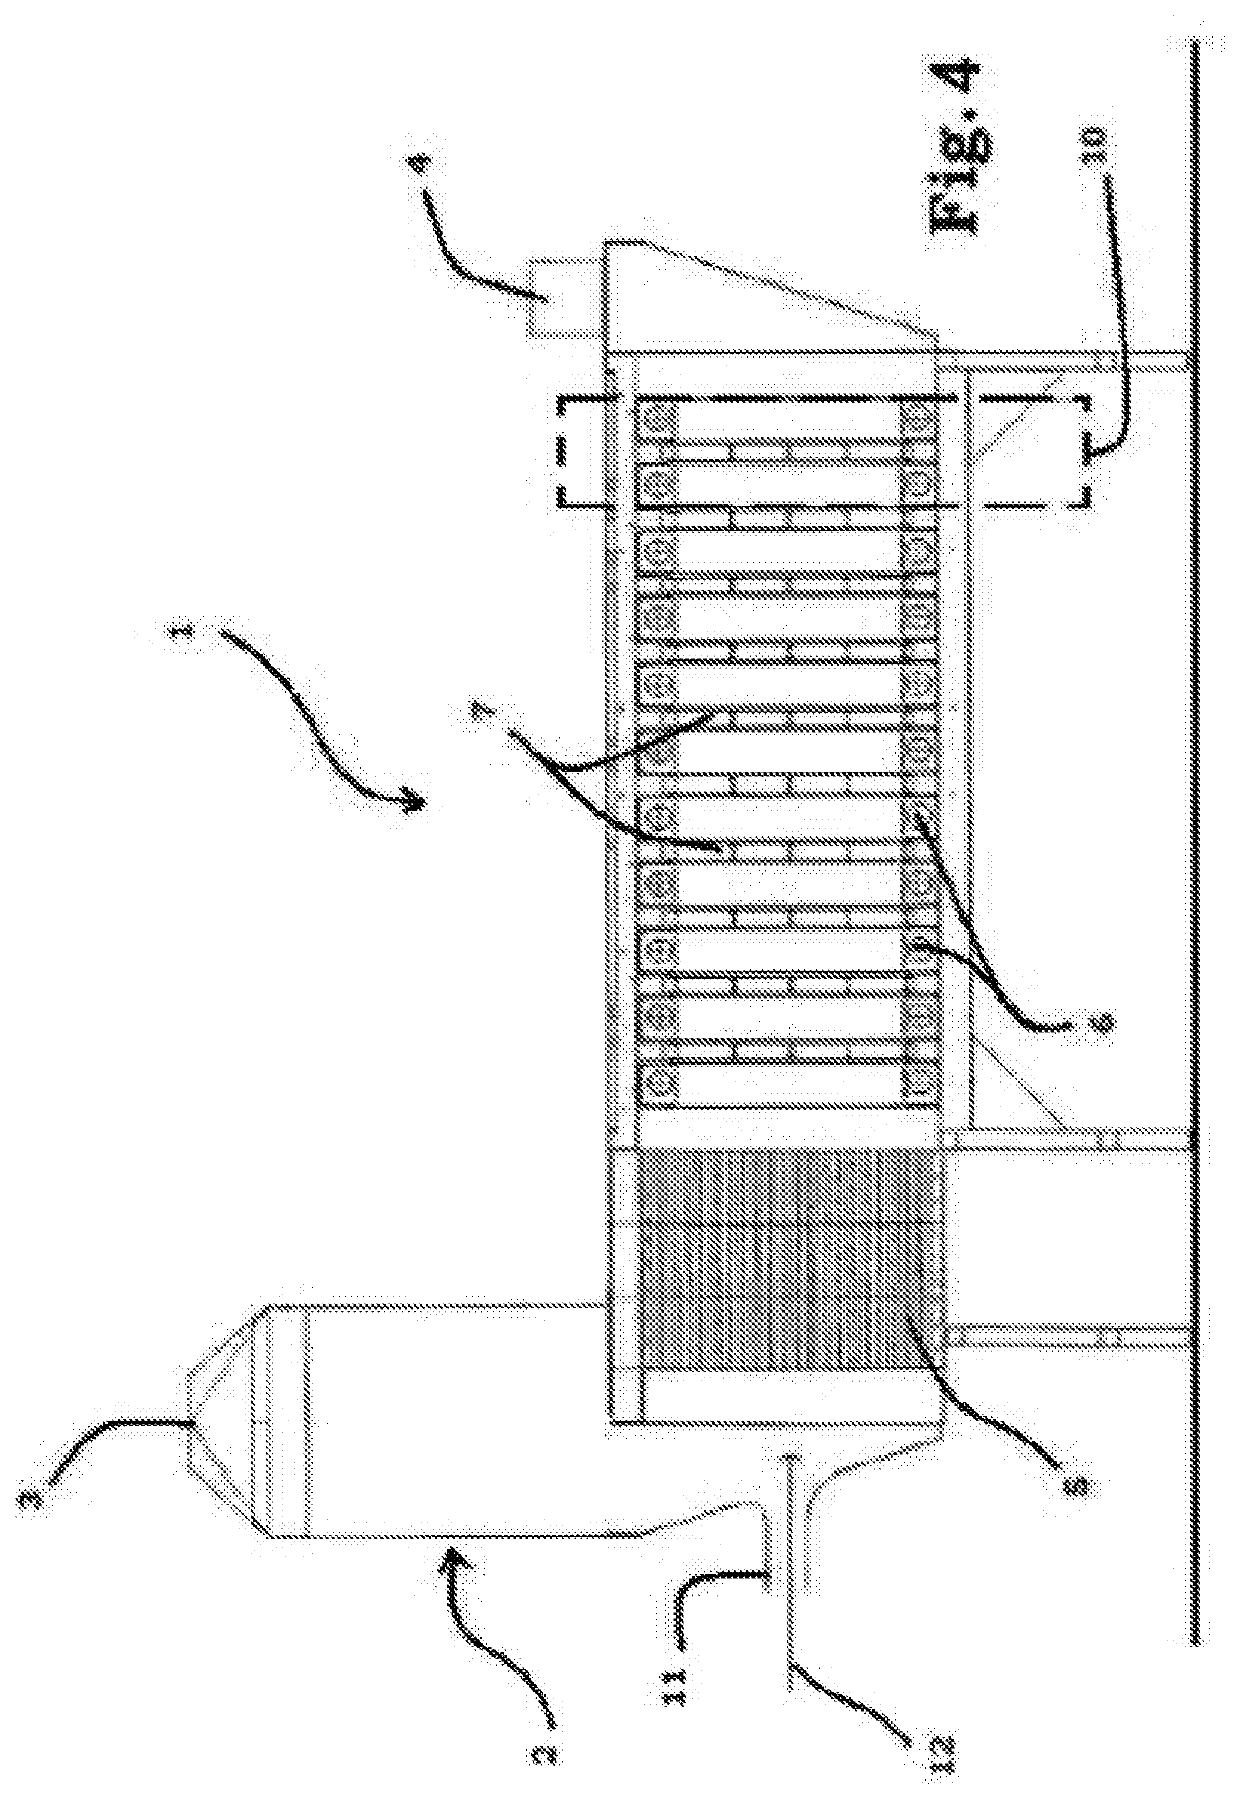 Device for reducing pollutants in a gaseous mixture